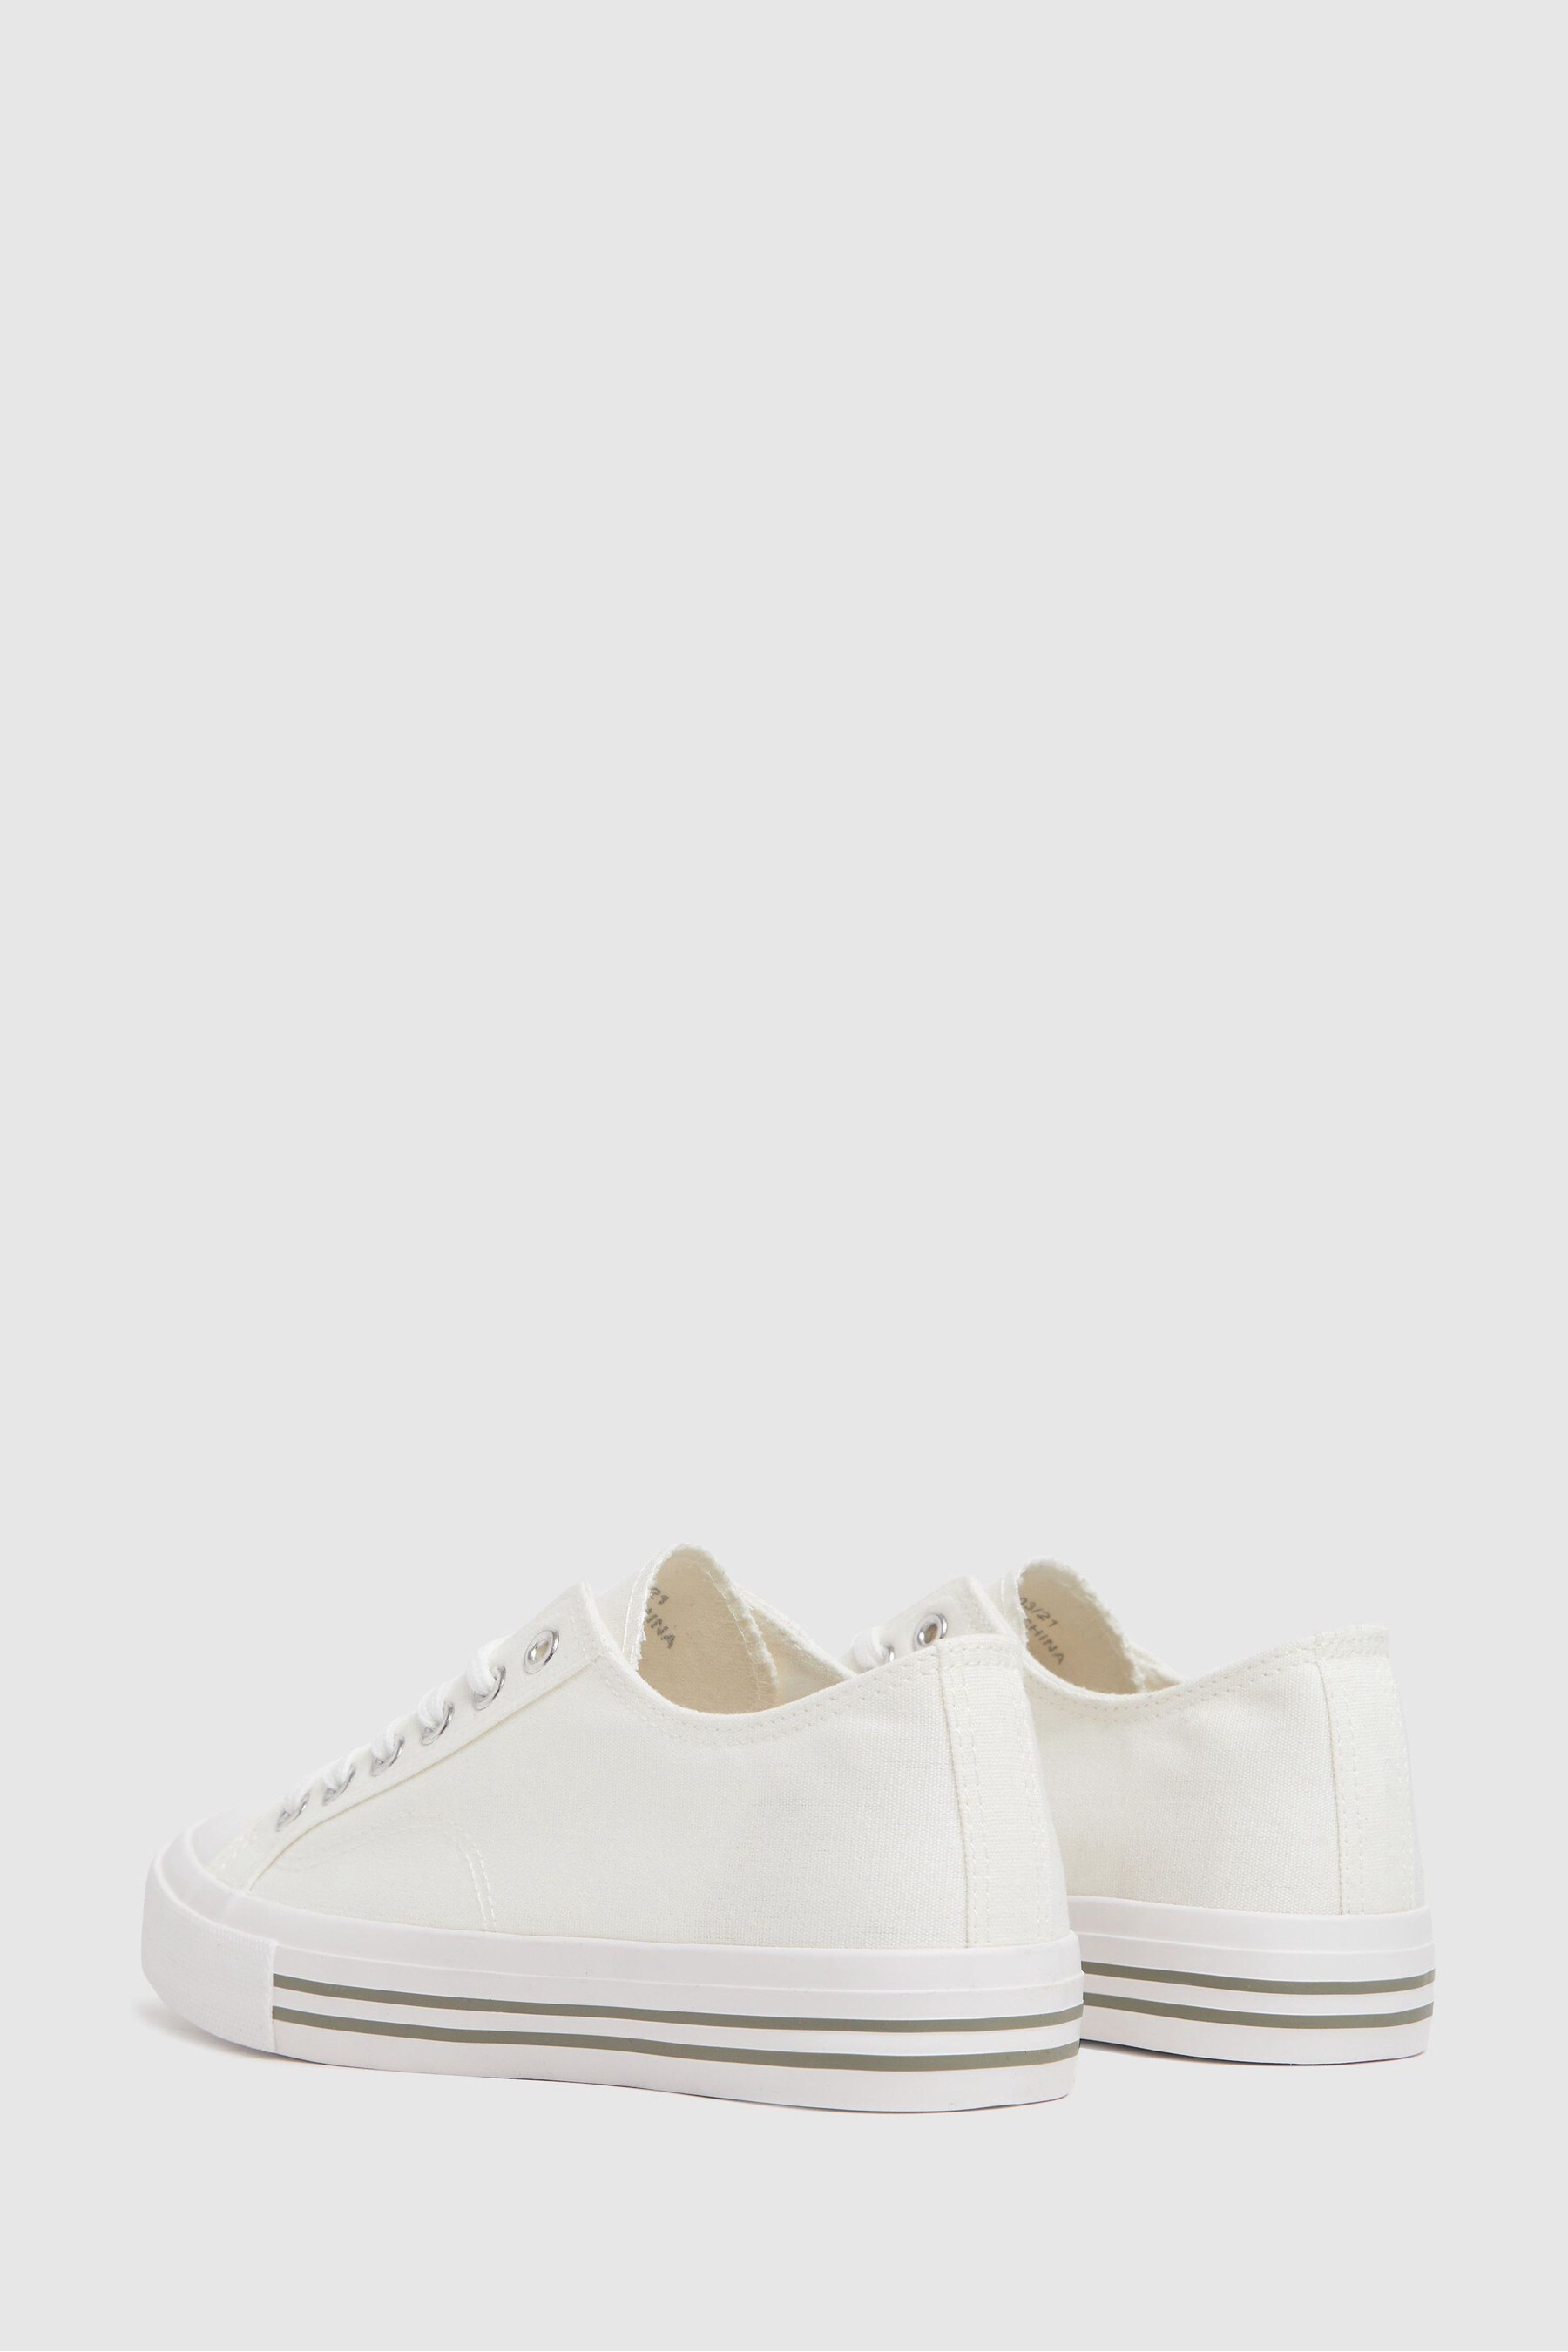 Buy Schuh White Mercy Lace Up Trainers from the Next UK online shop